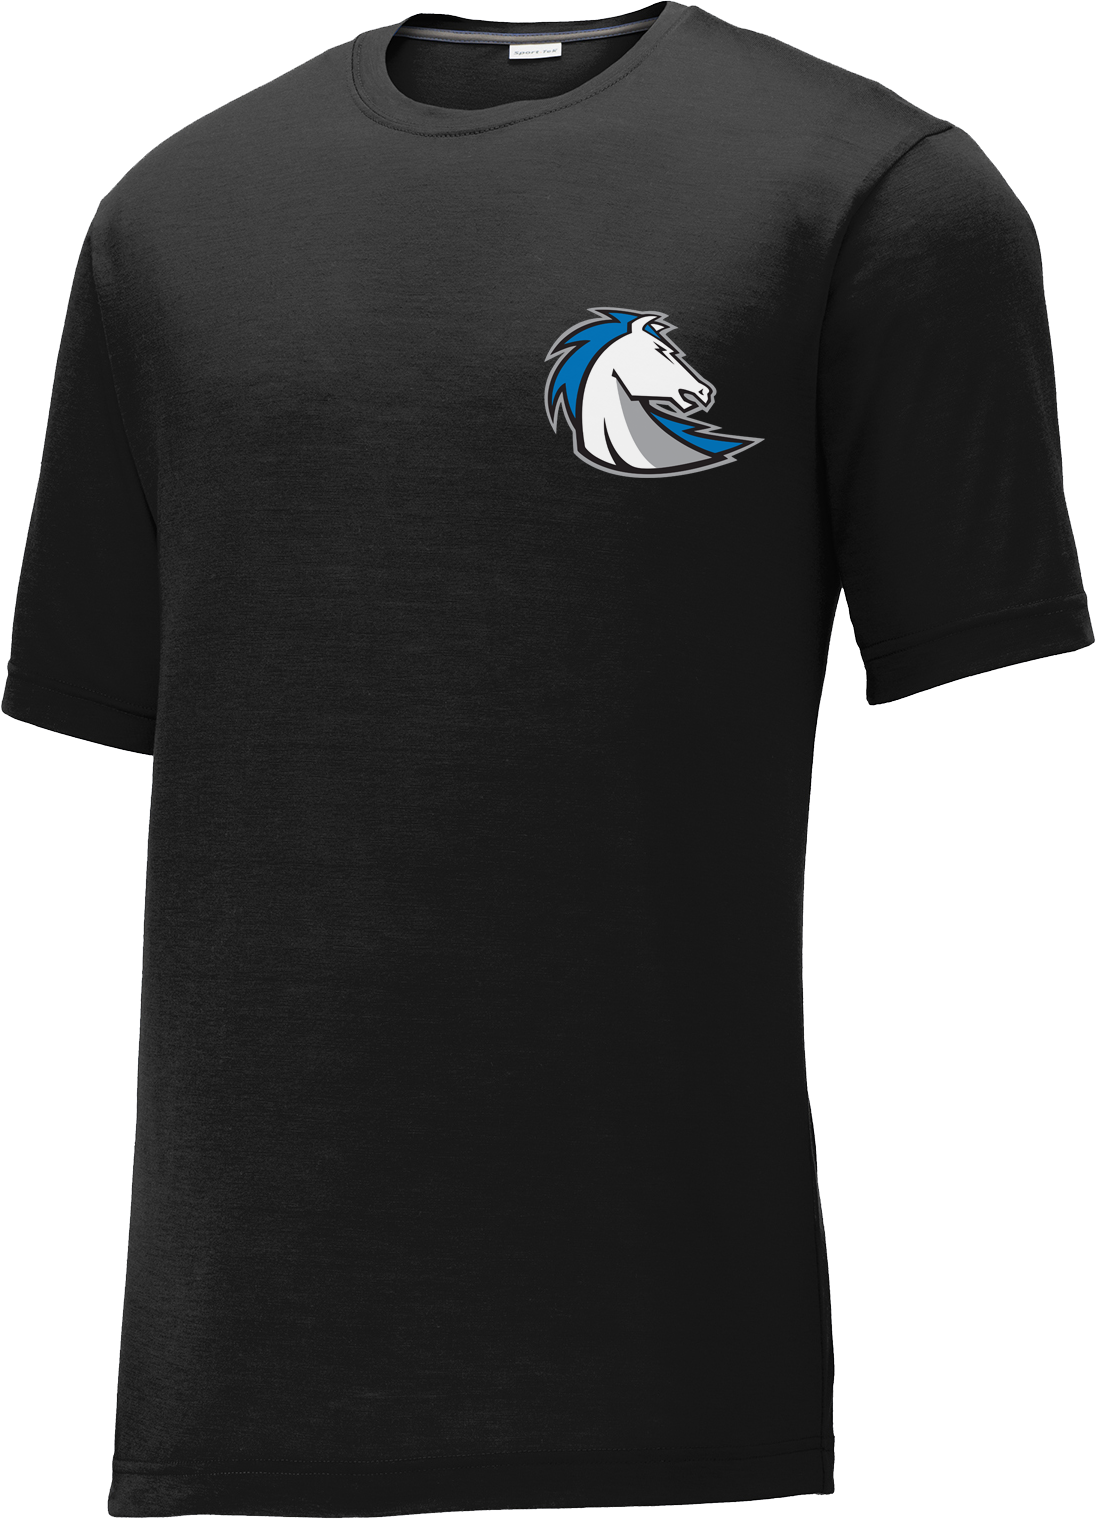 Clear Springs Lacrosse Black CottonTouch Performance Shirt